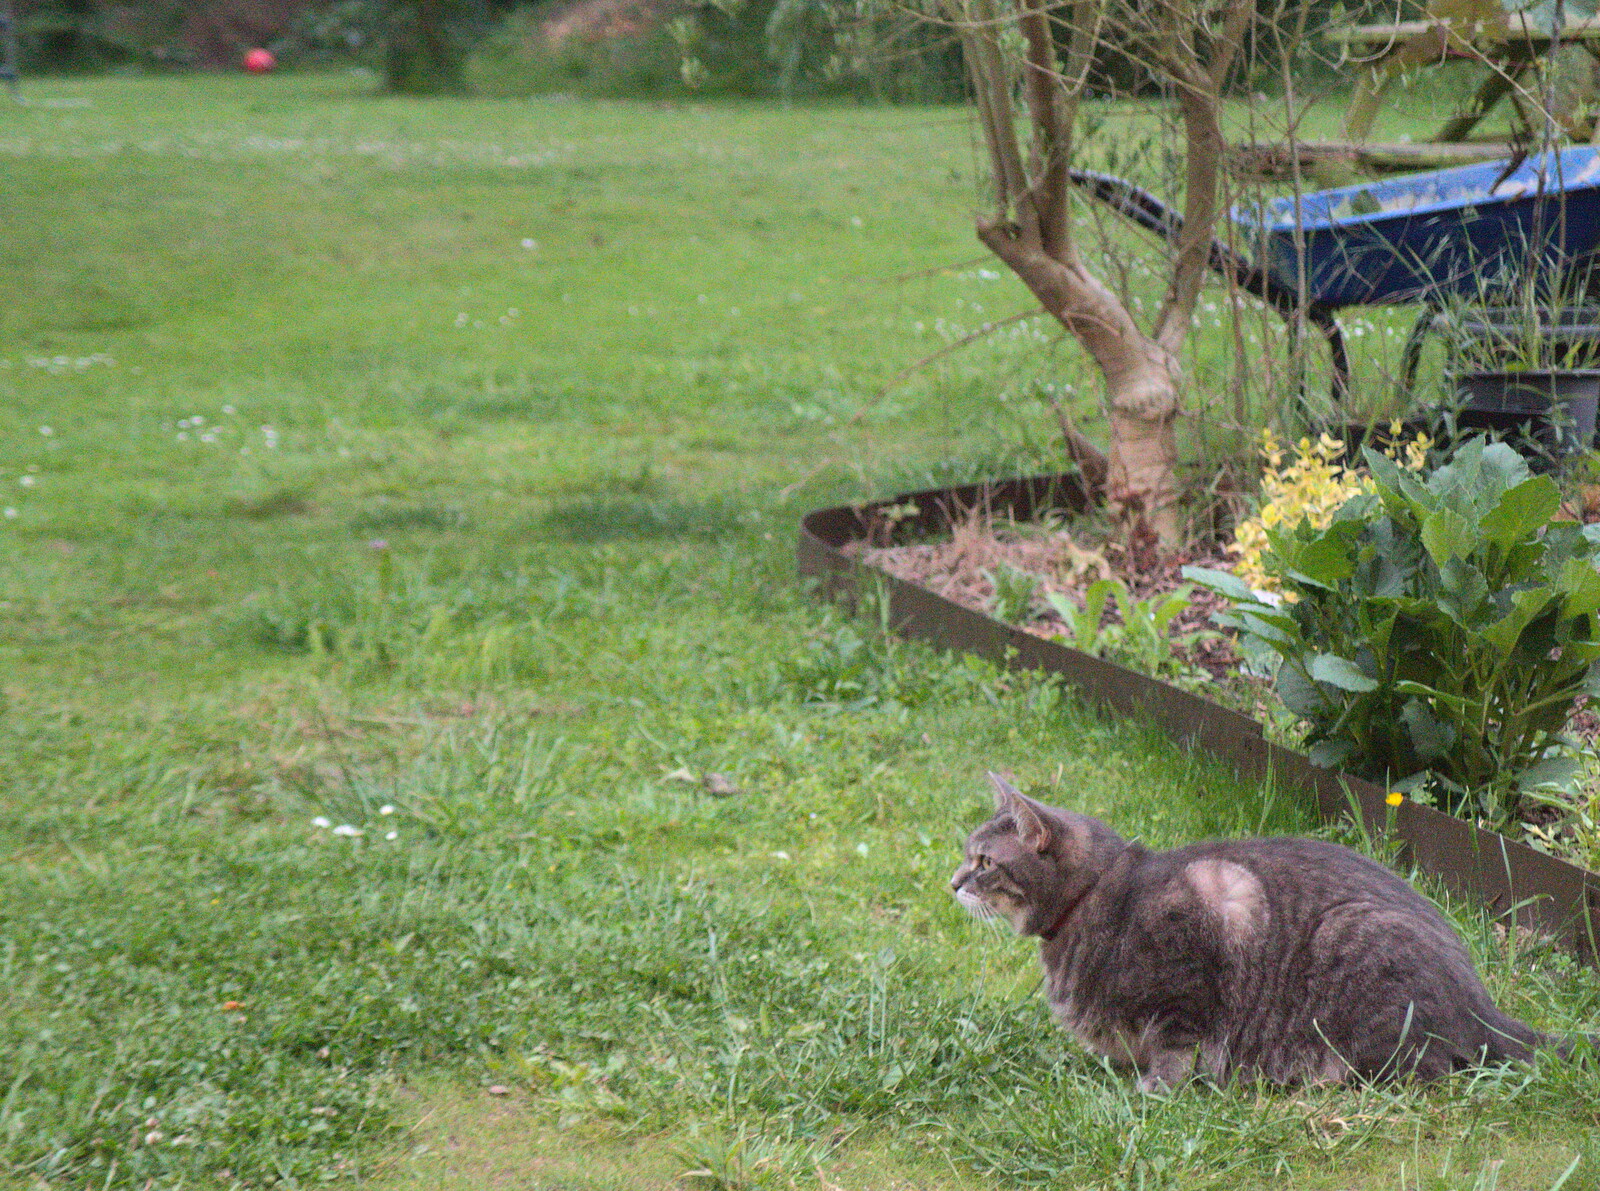 Boris - stripey cat - in the garden from The Not-Opening of the Palgrave Playground, Palgrave, Suffolk - 3rd June 2018